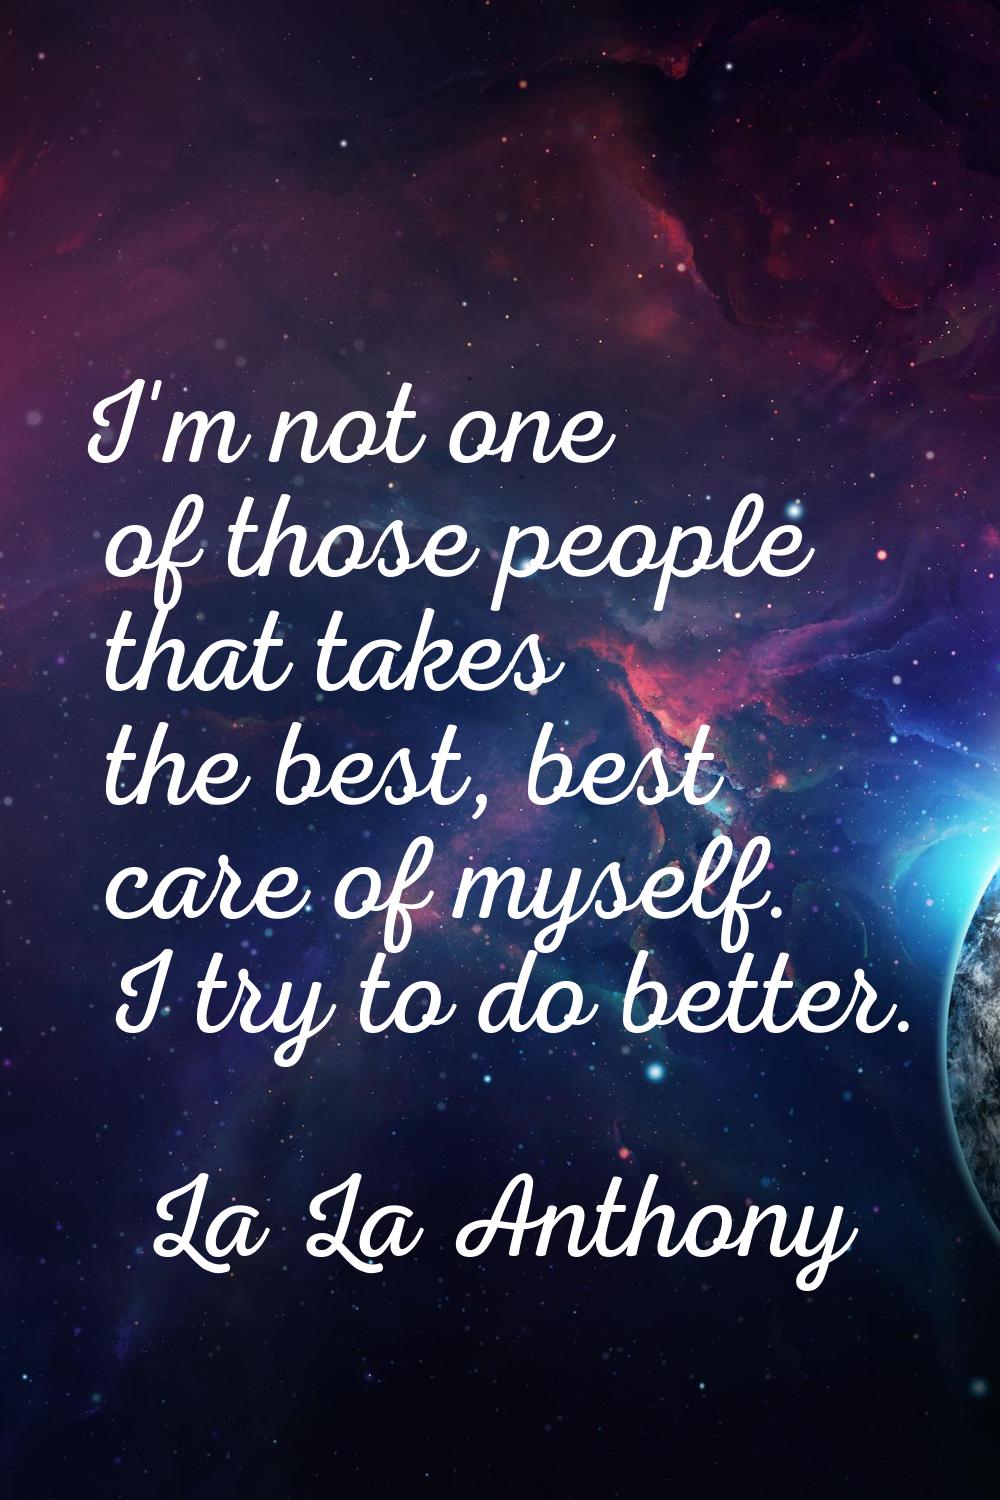 I'm not one of those people that takes the best, best care of myself. I try to do better.